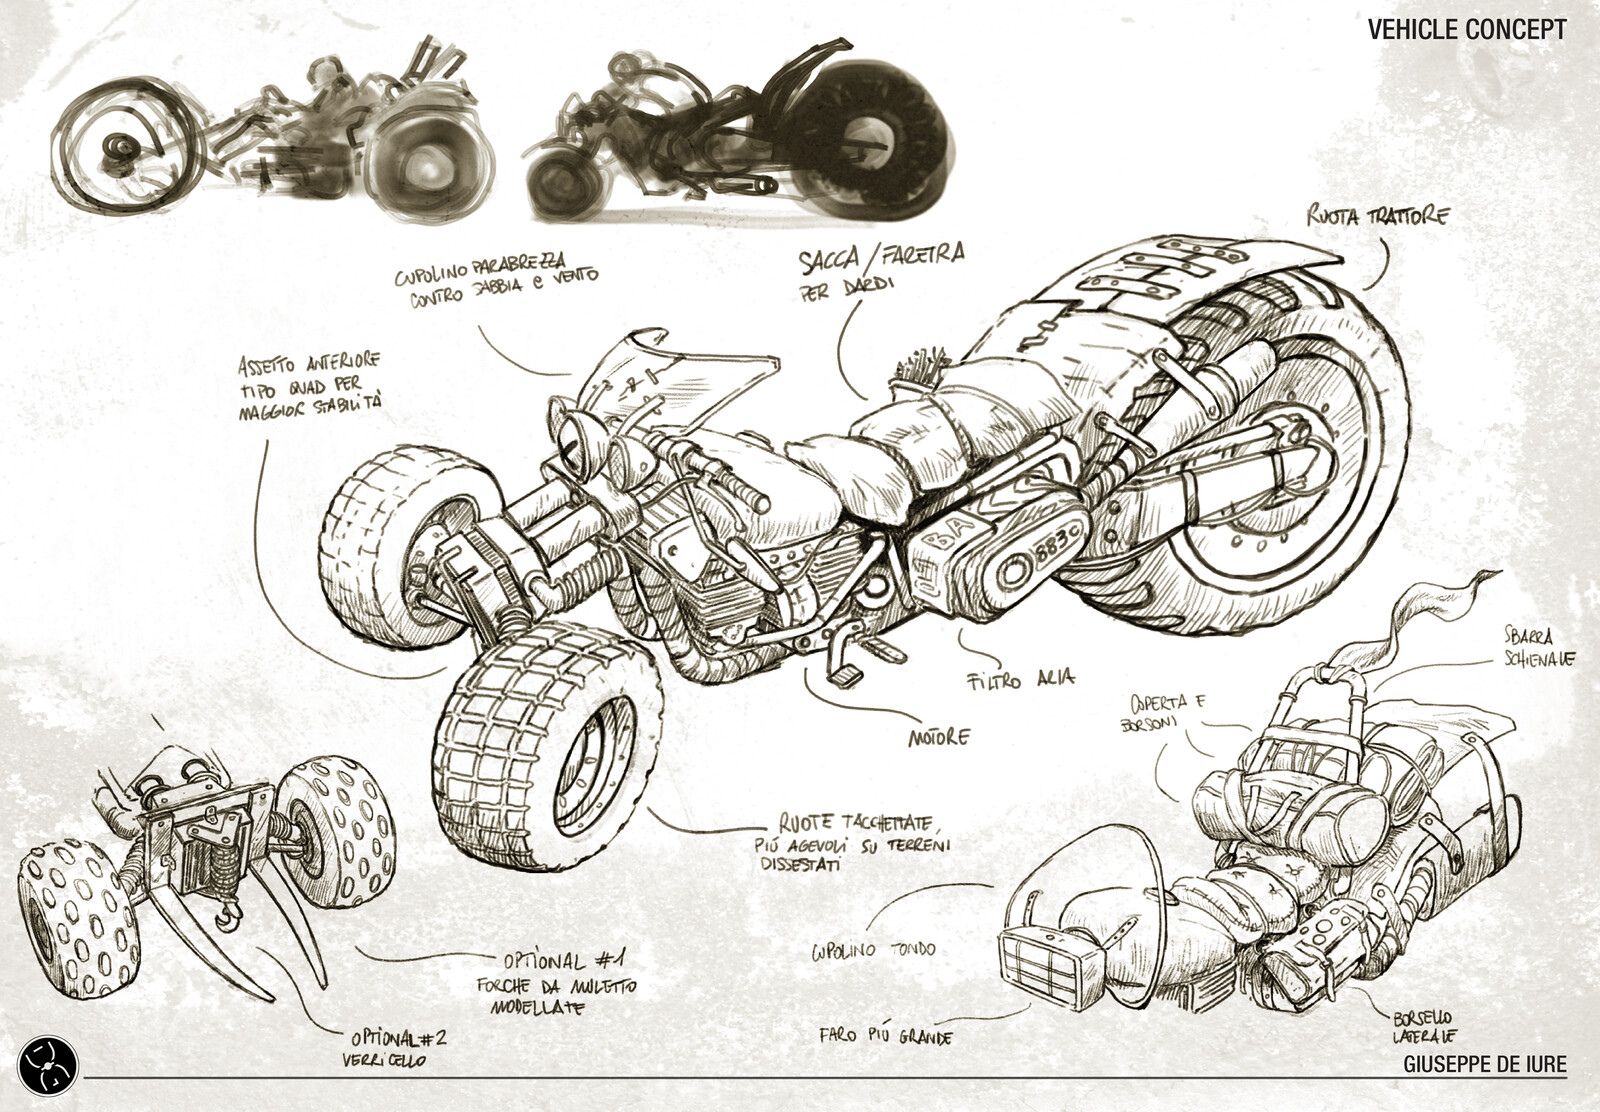 Girl's vehicle, the request was to make a desert vehicle by mixing a motorcycle type of vehicle and a quad.